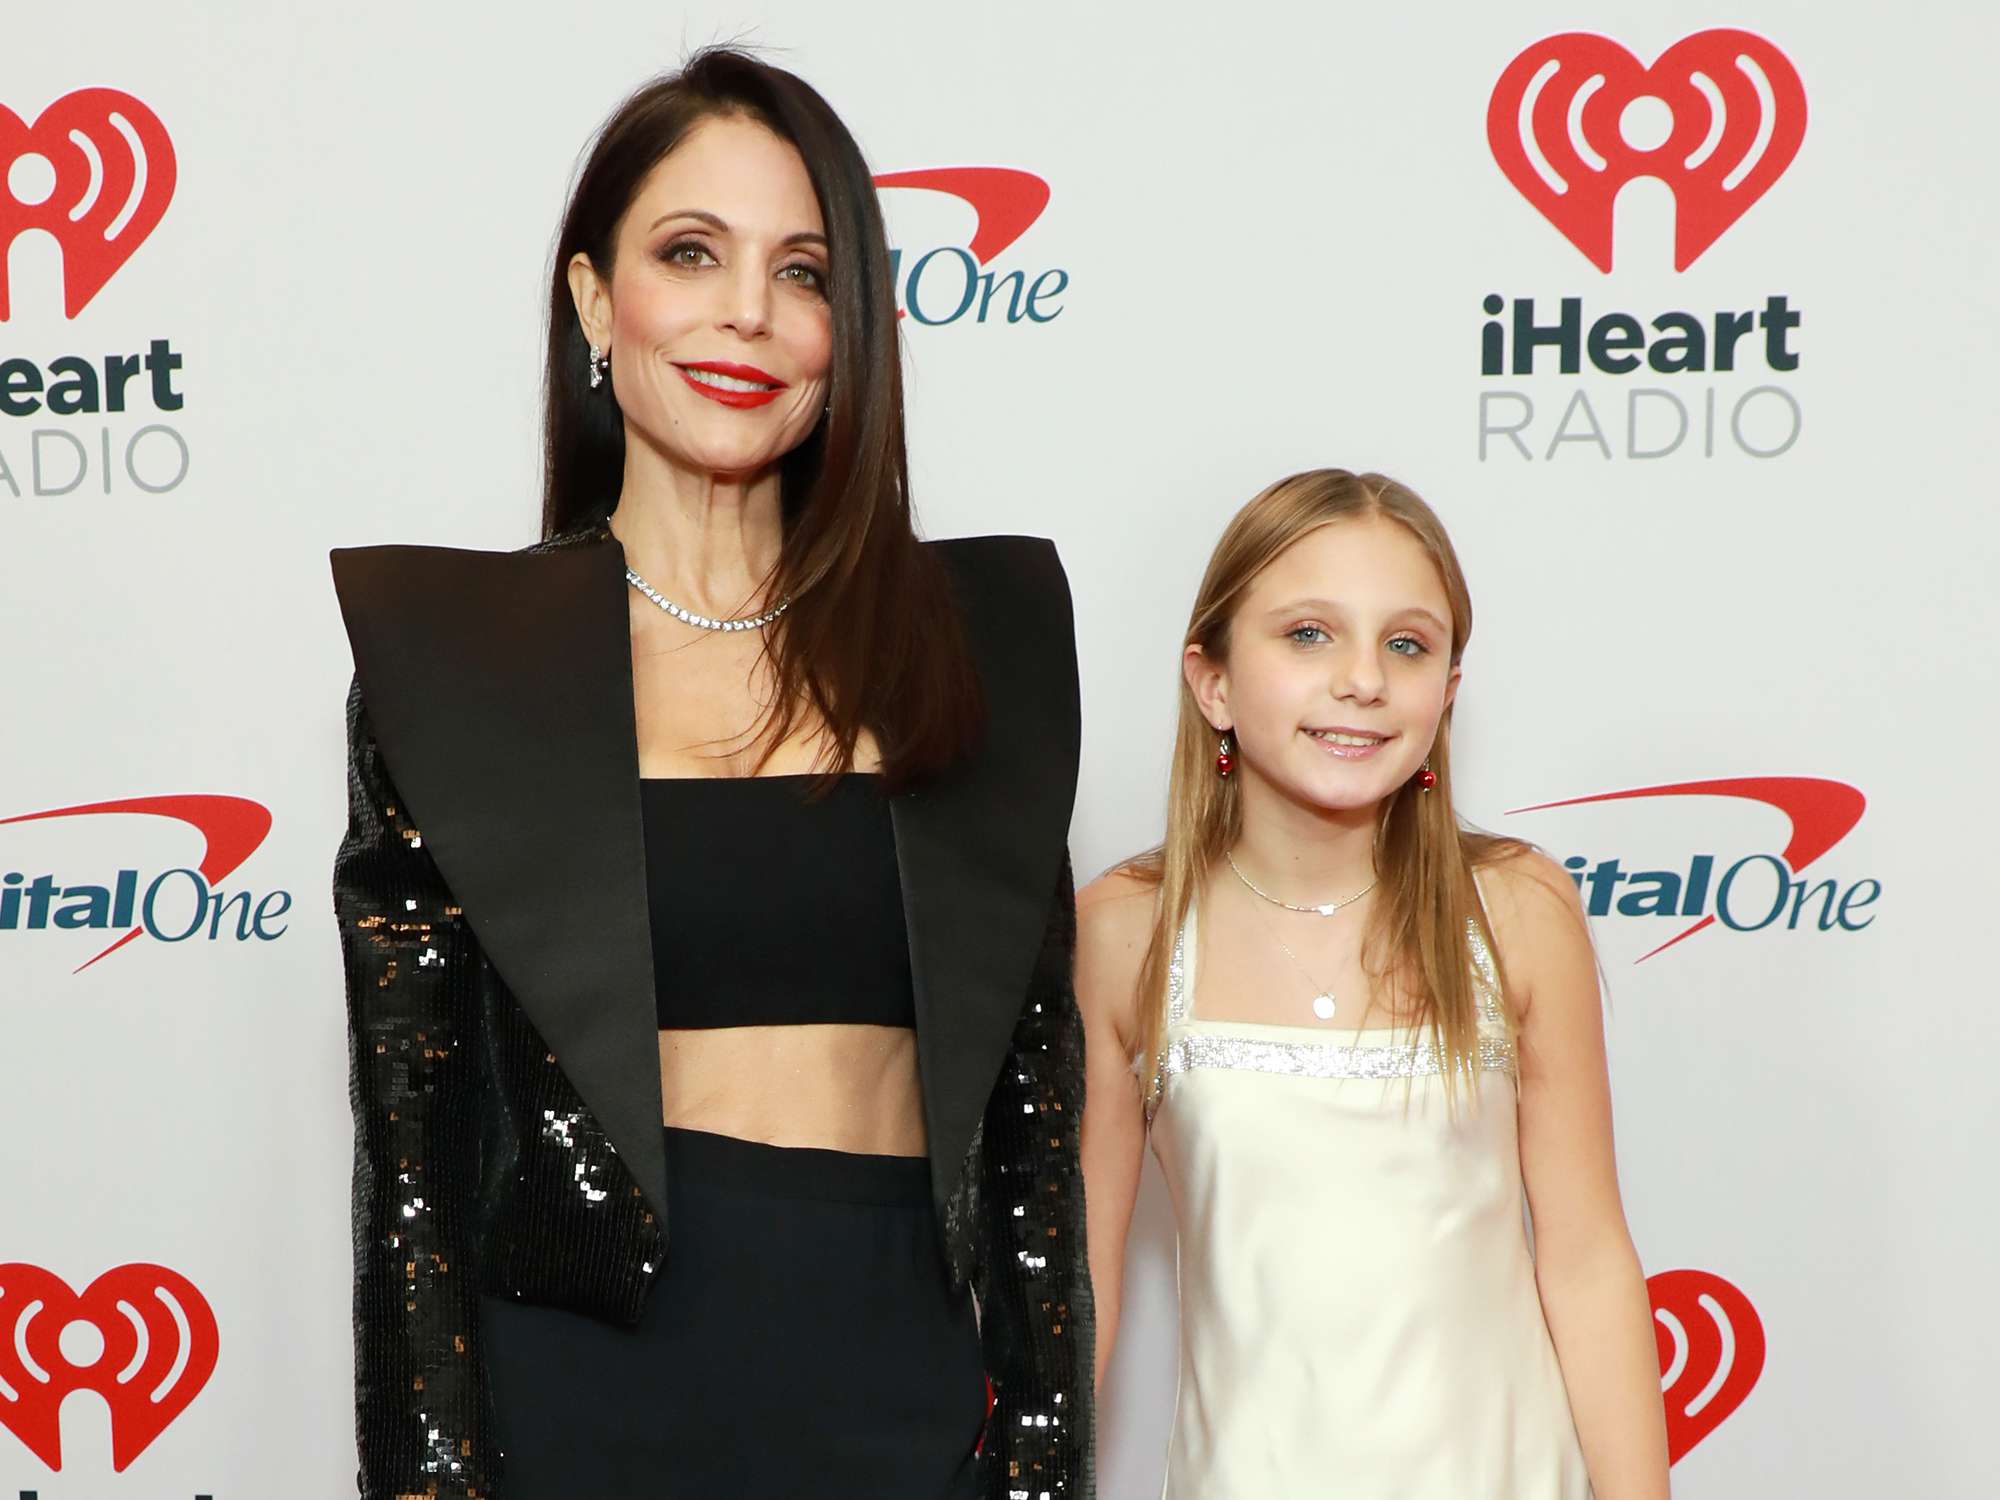 Bethenny Frankel (L) and Bryn Hoppy attend Z100's iHeartRadio Jingle Ball 2021at Madison Square Garden on December 10, 2021 in New York City